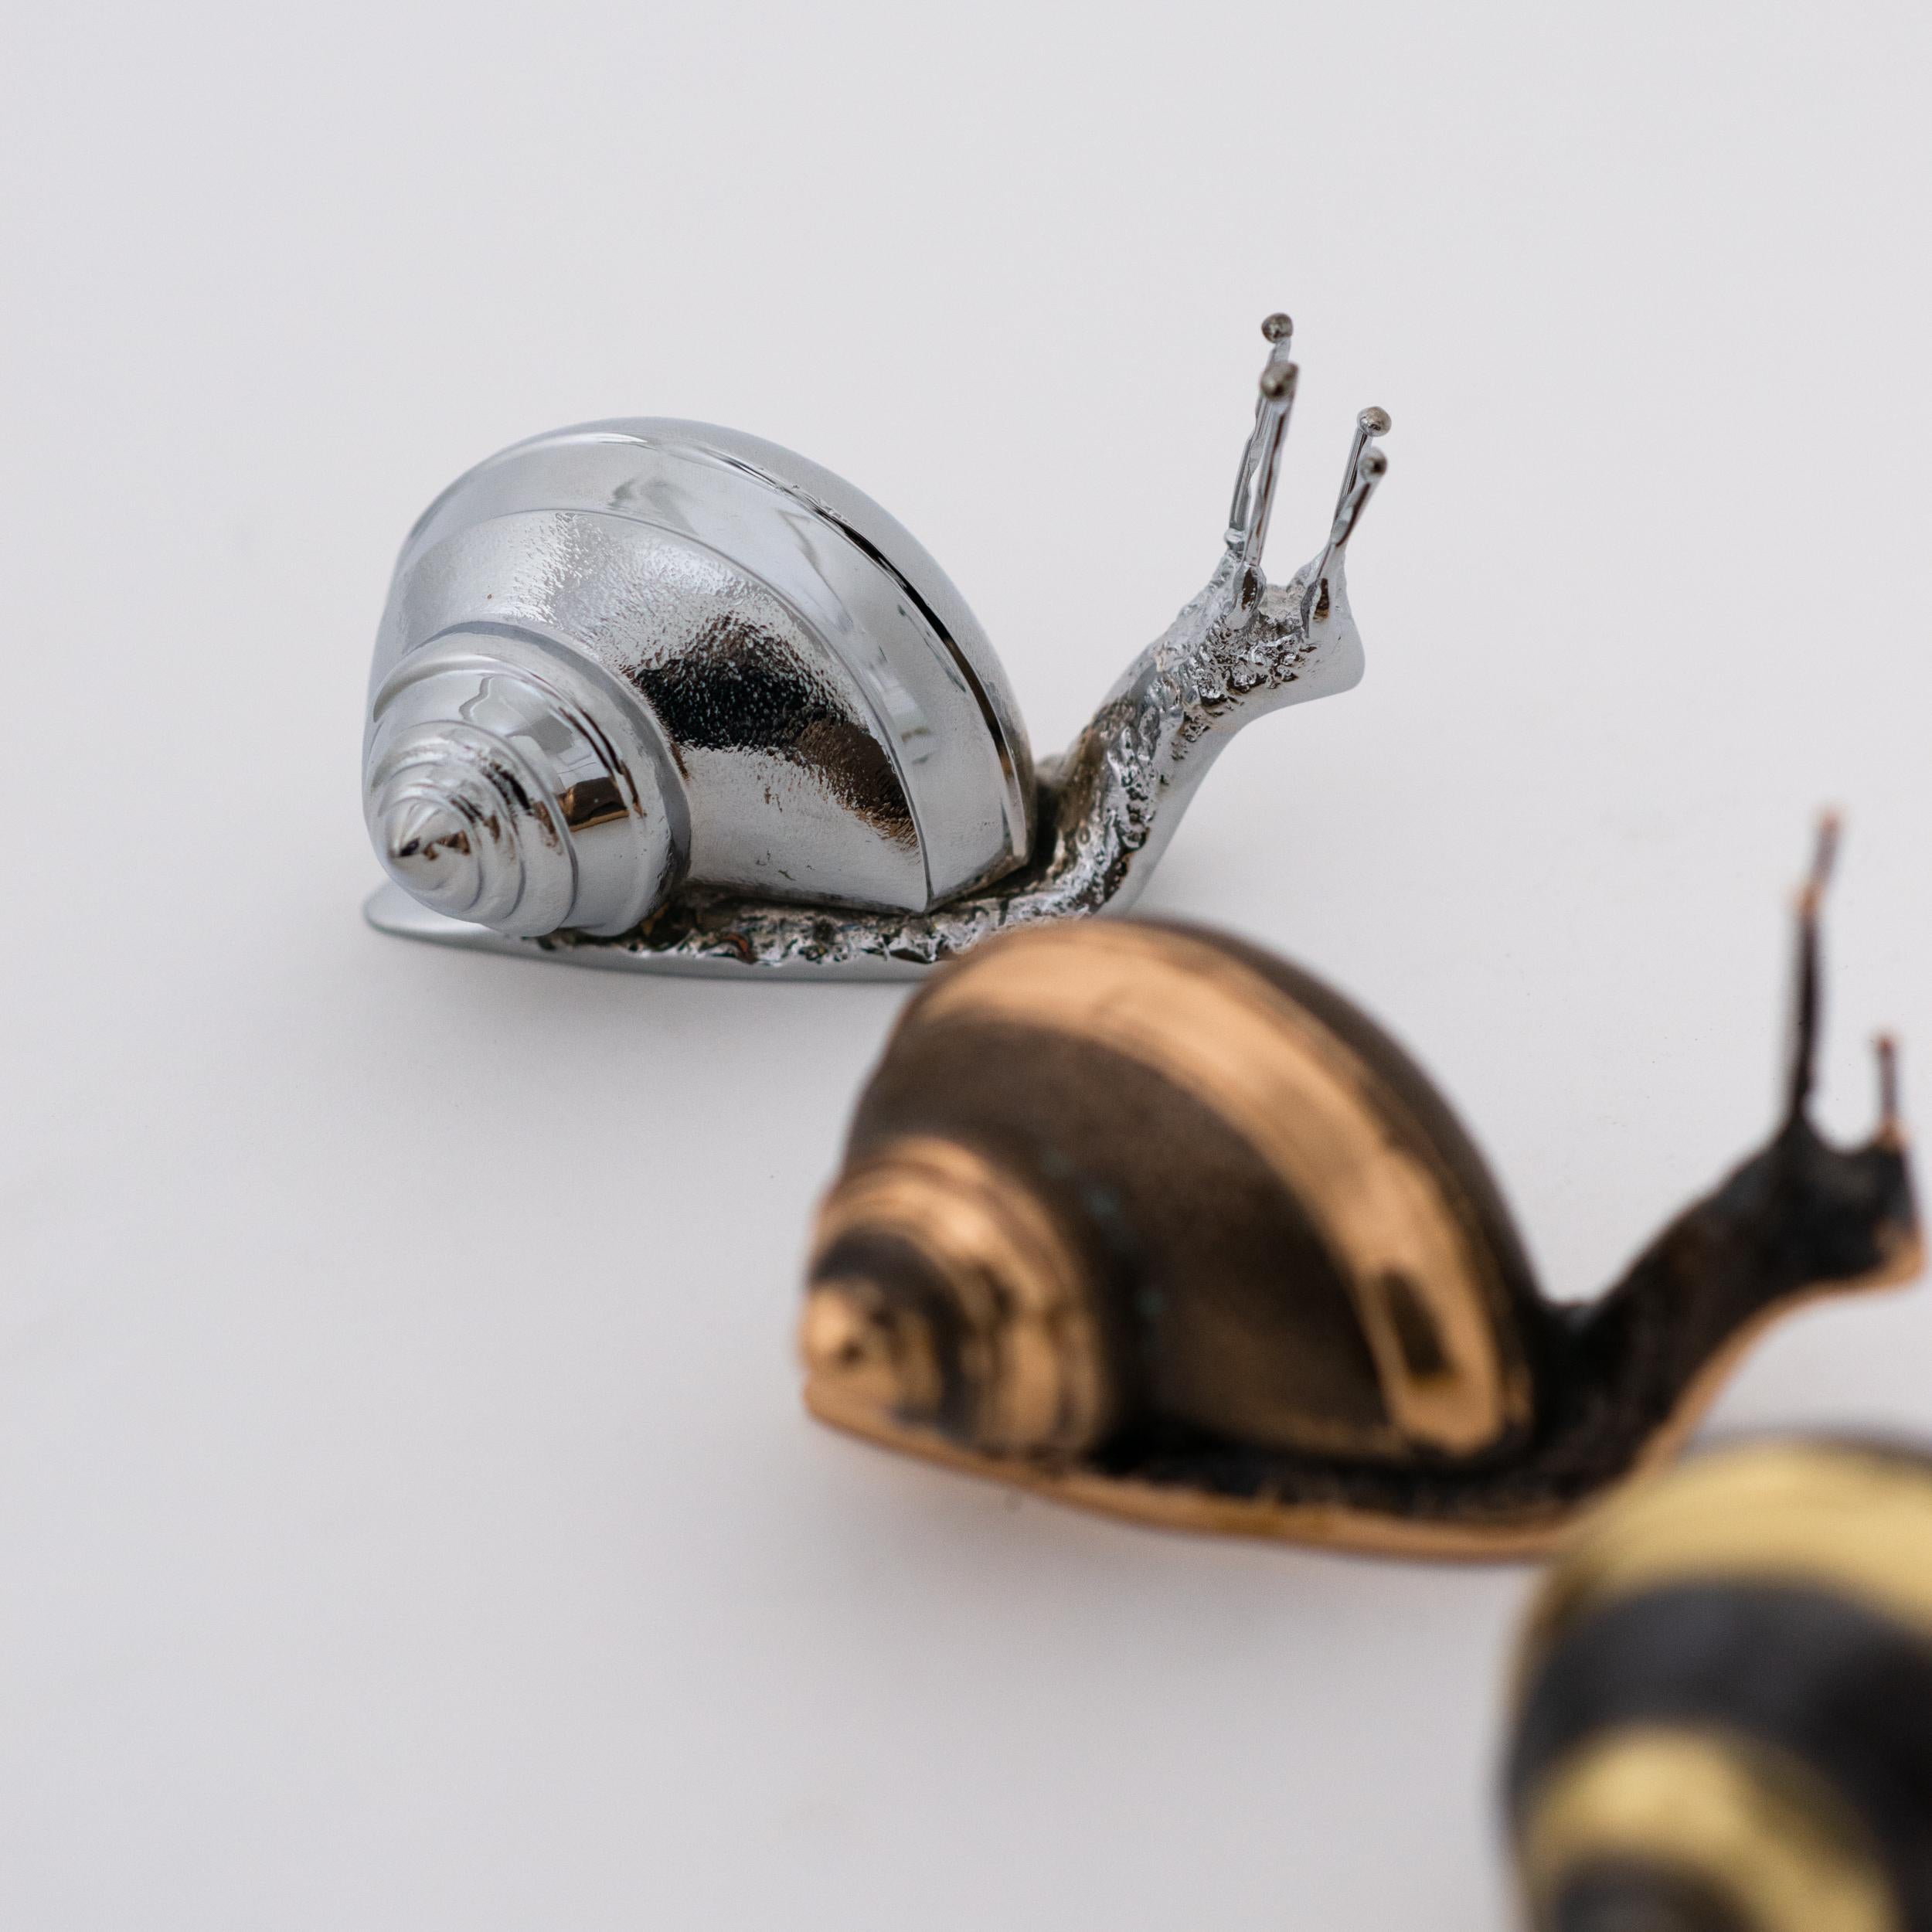 Cast Handmade Nickel Plated Decorative Snail, Paperweight For Sale